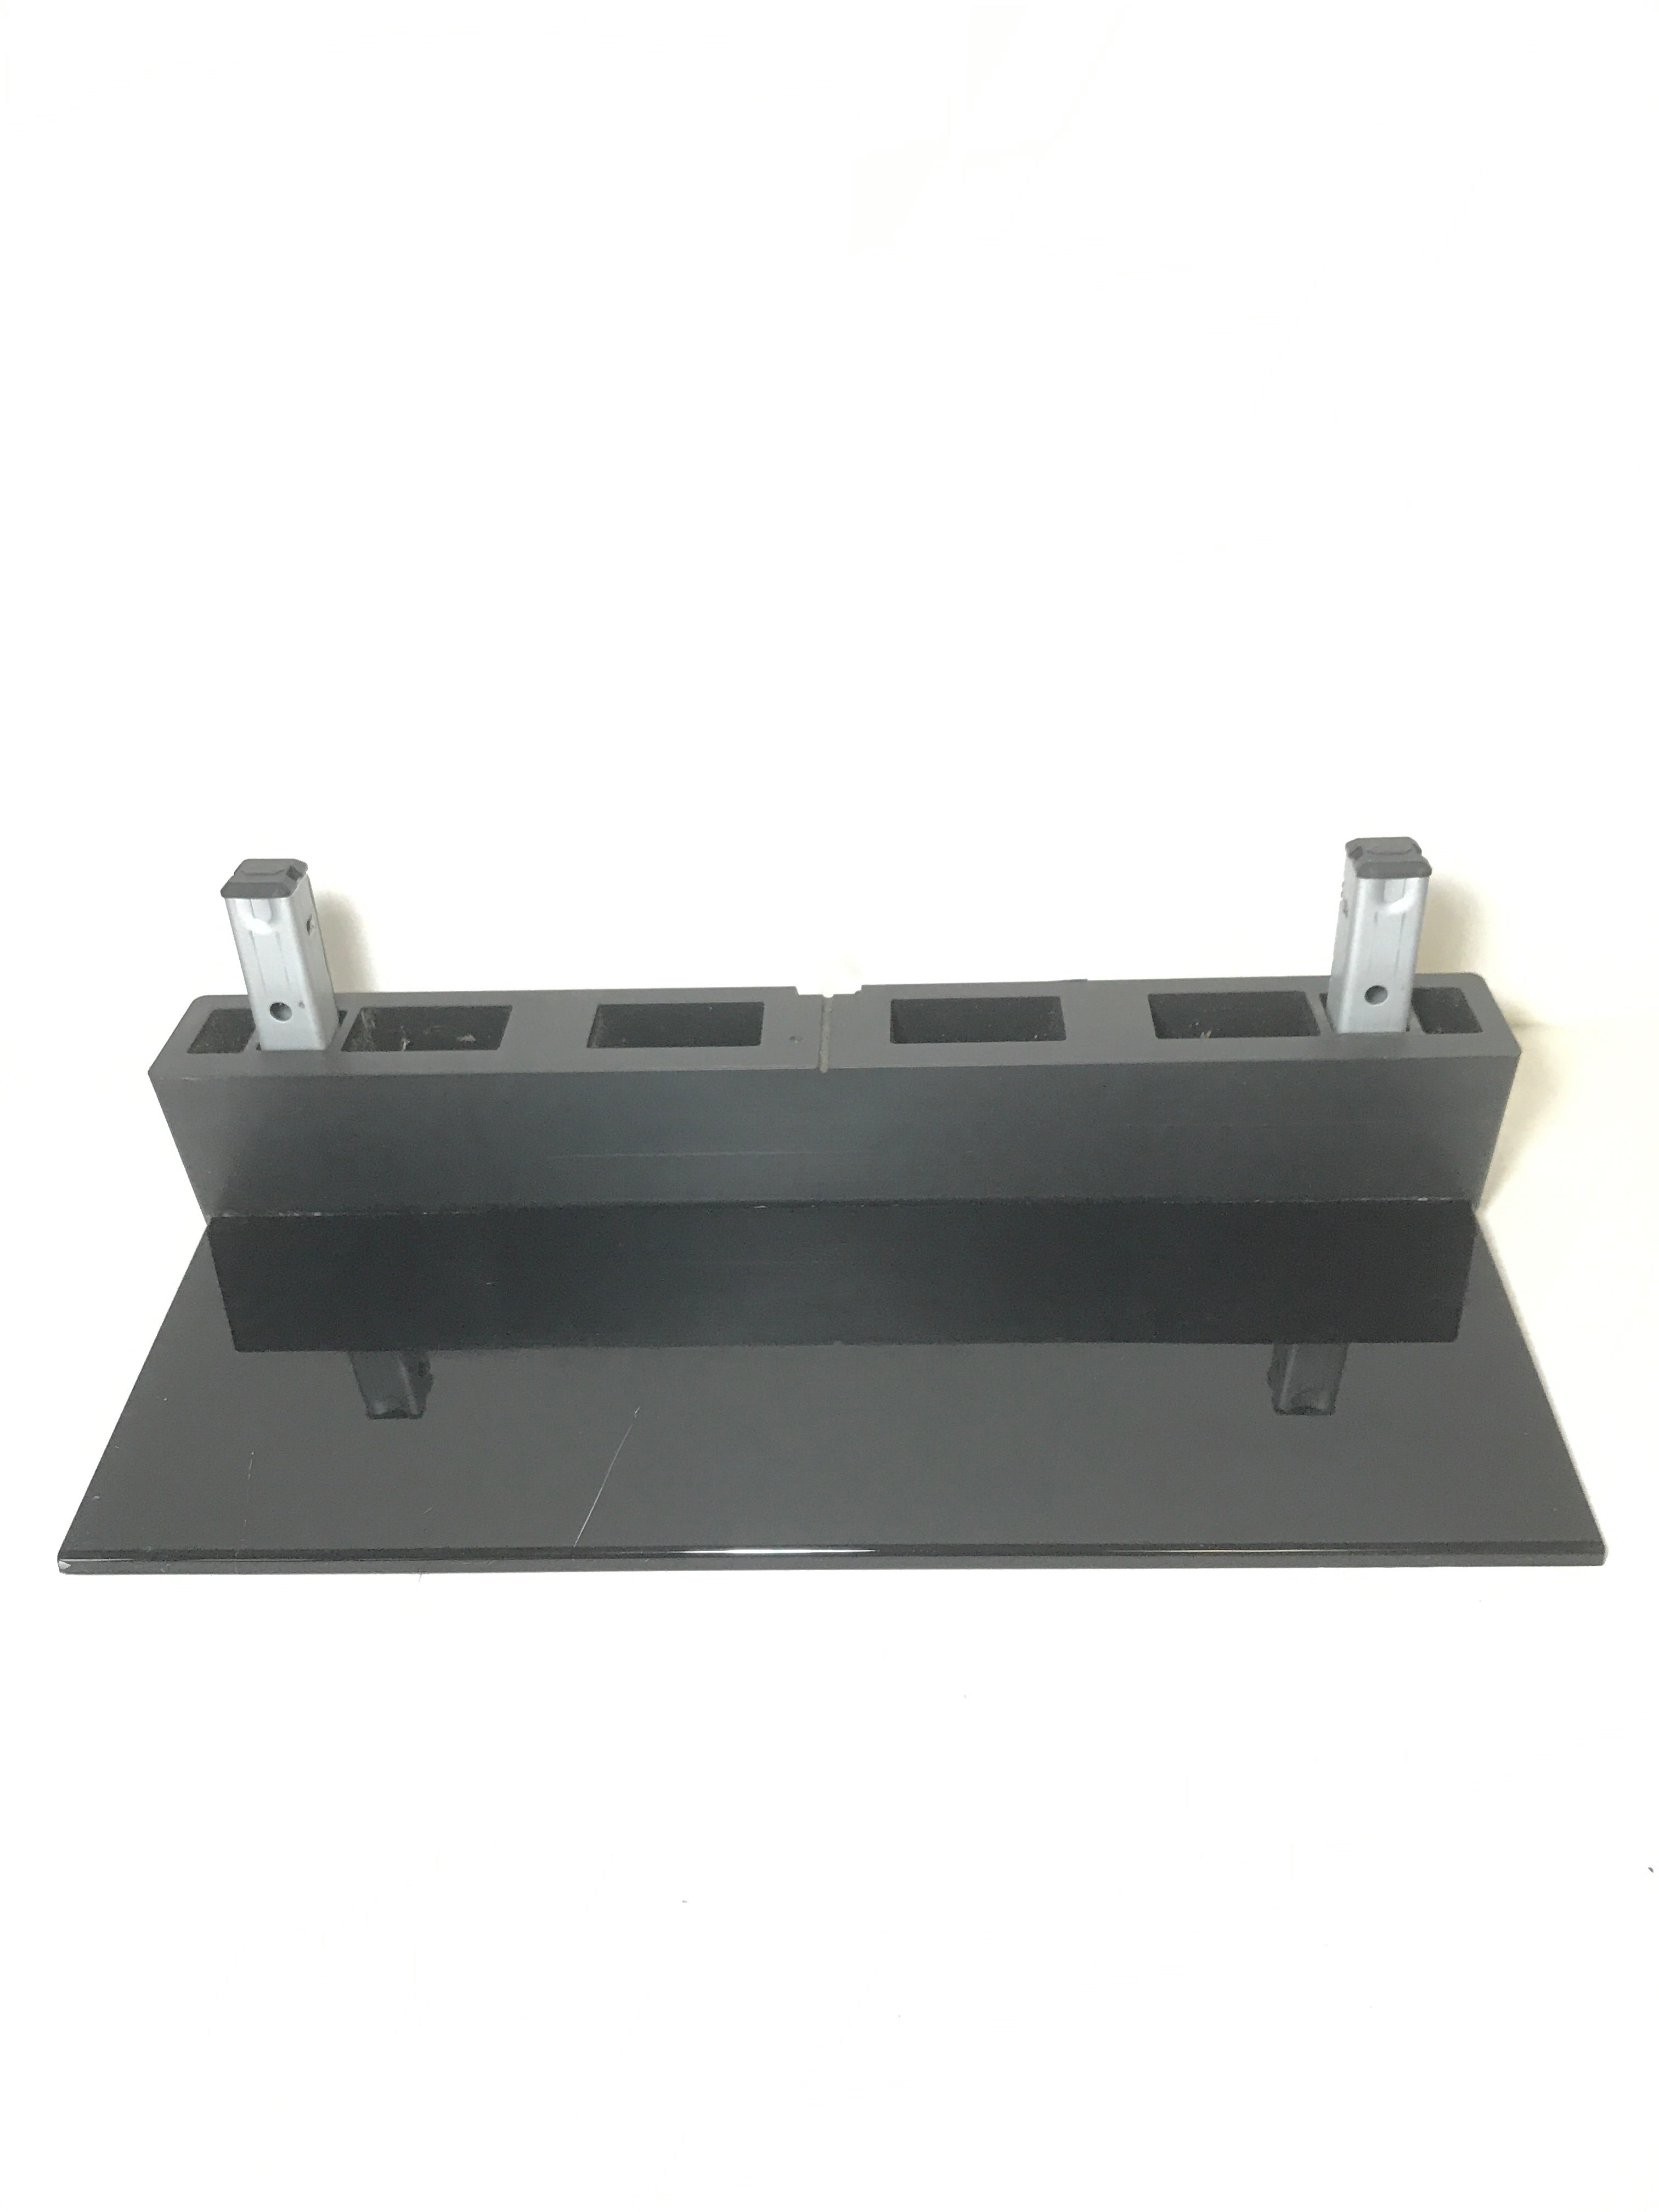 Sony KDL-46XBR3 TV Stand/Base